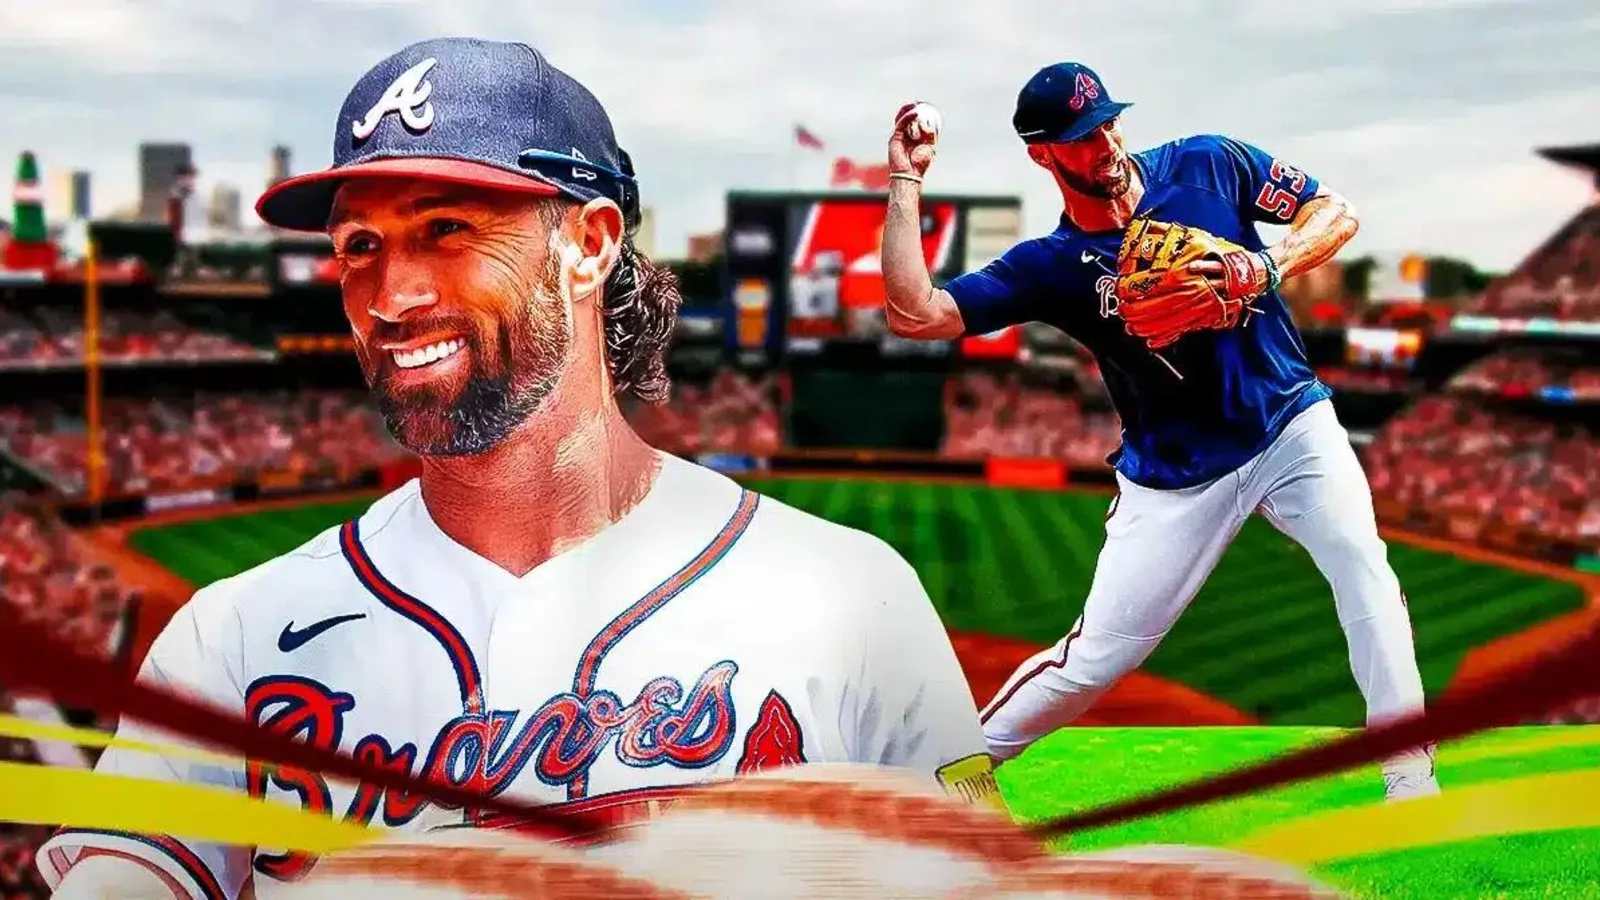 Braves’ Charlie Culberson breaks silence on returning as a pitcher